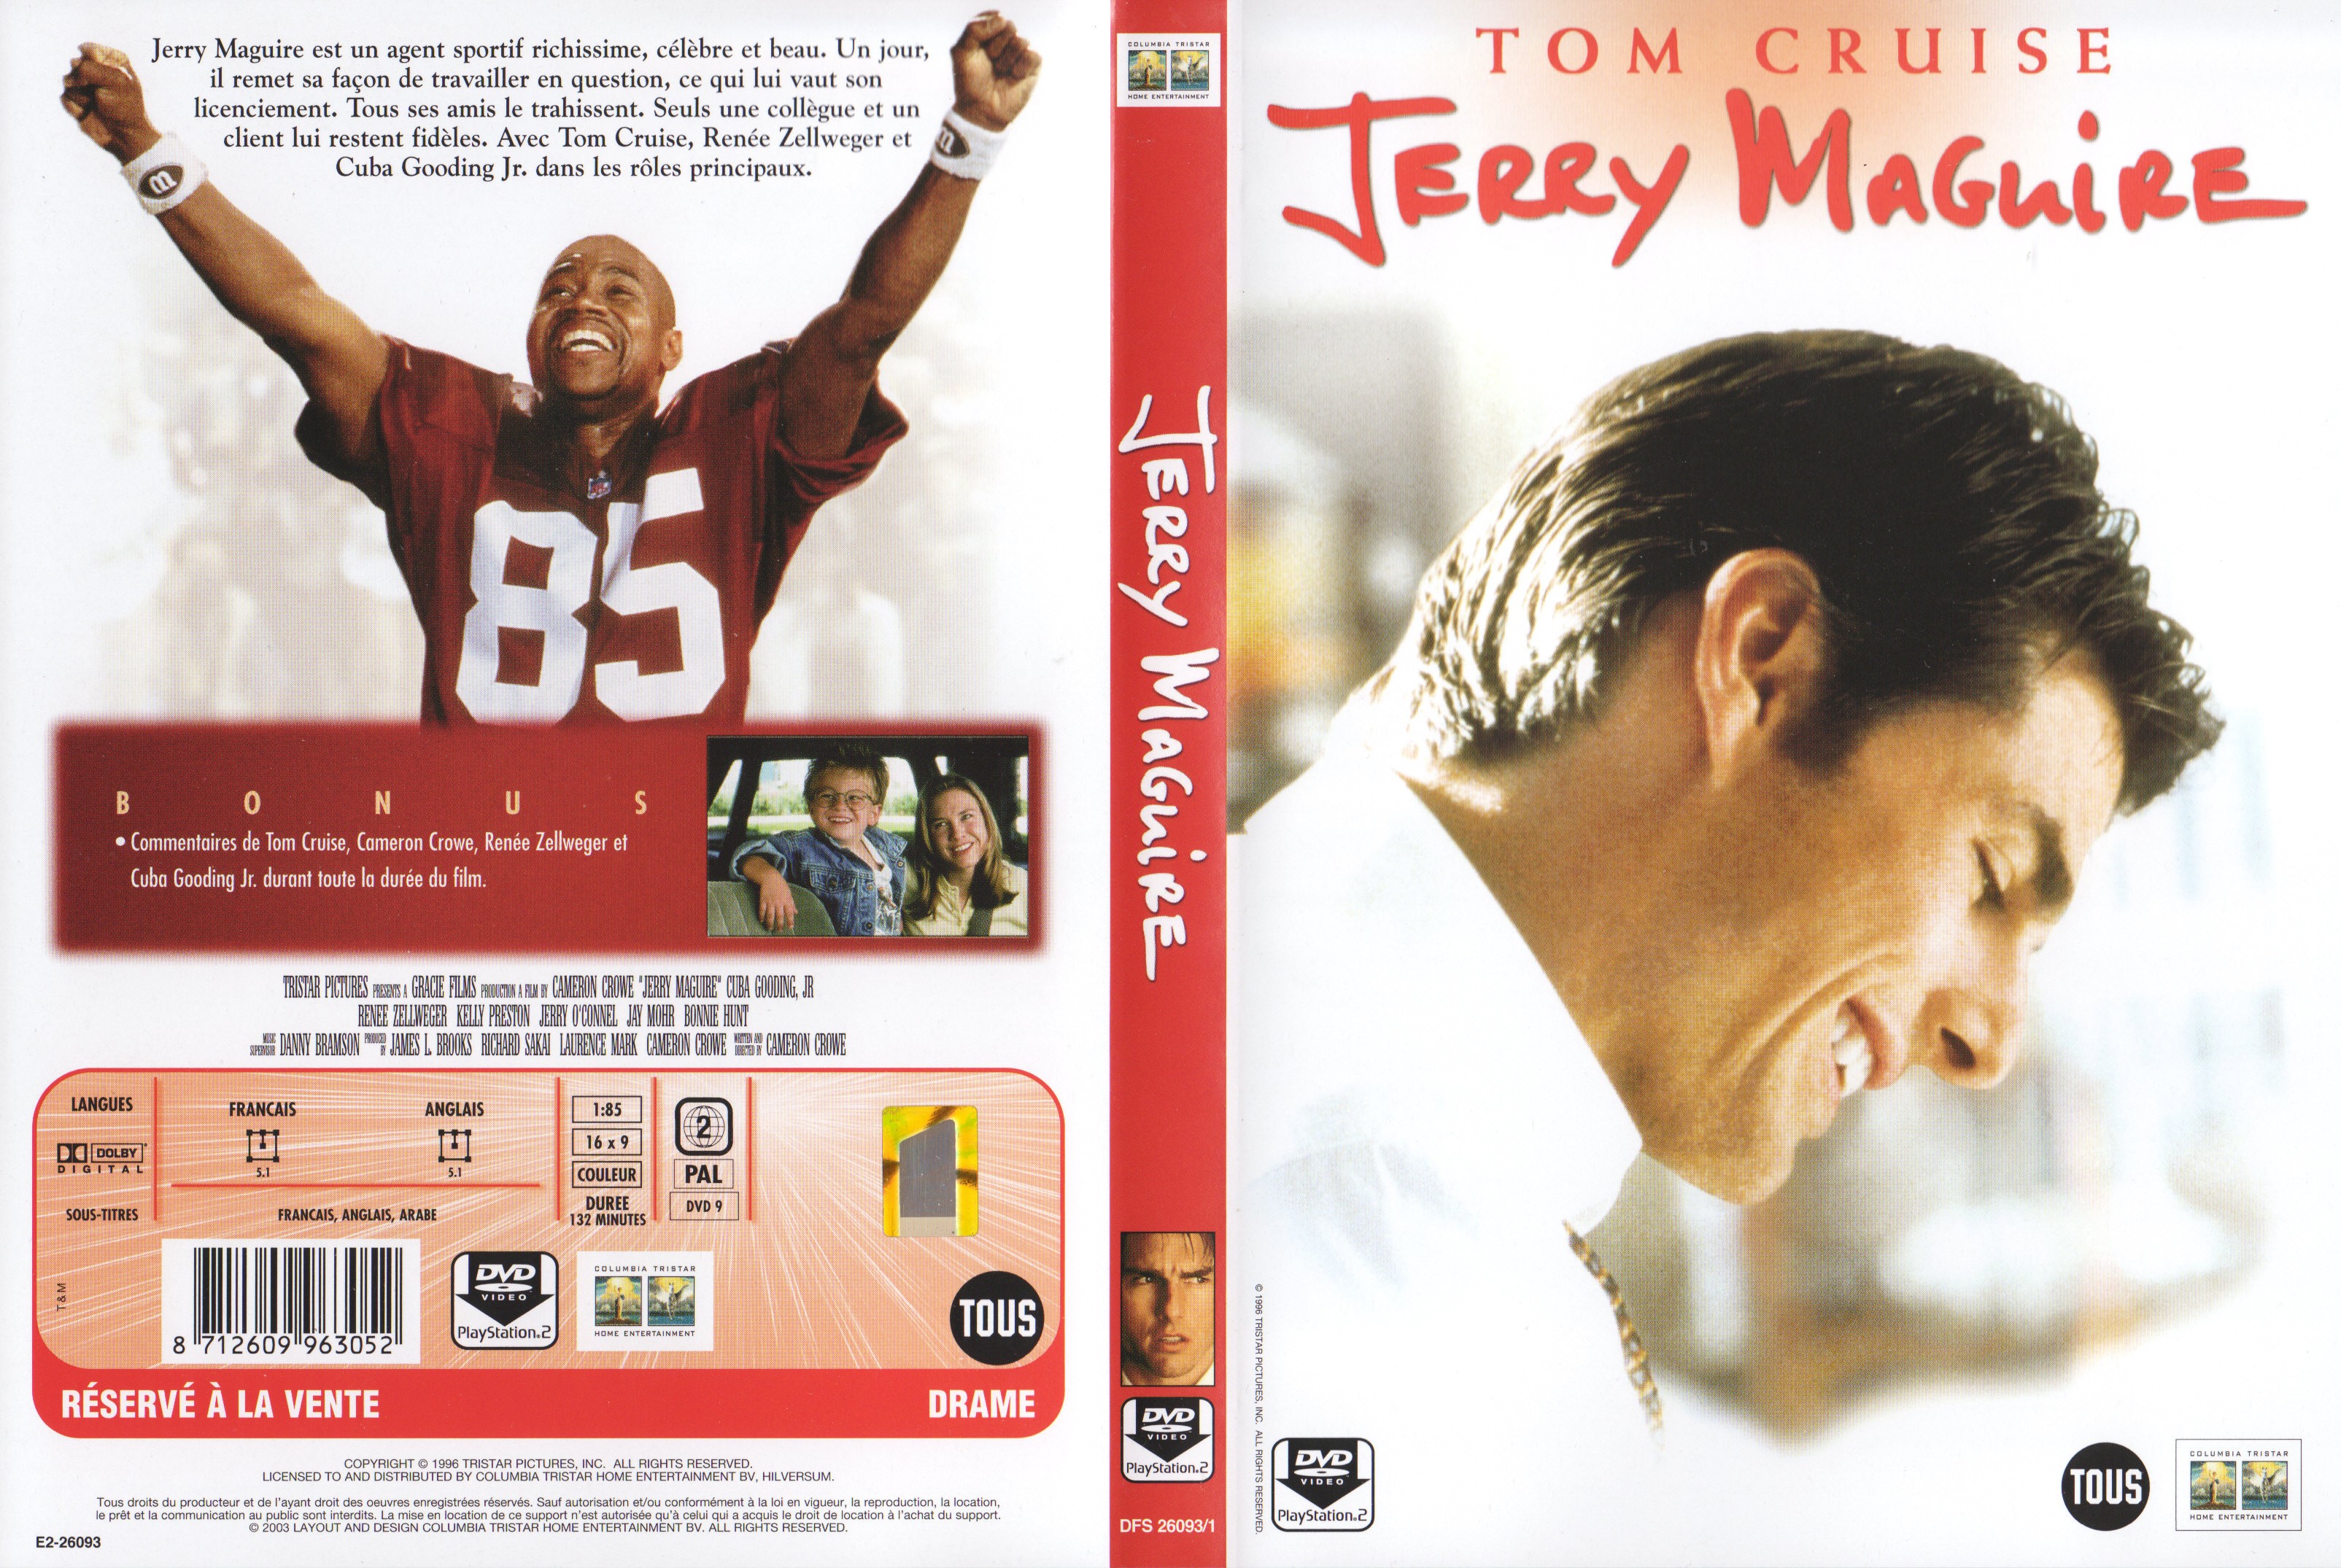 Jaquette DVD Jerry Maguire v2